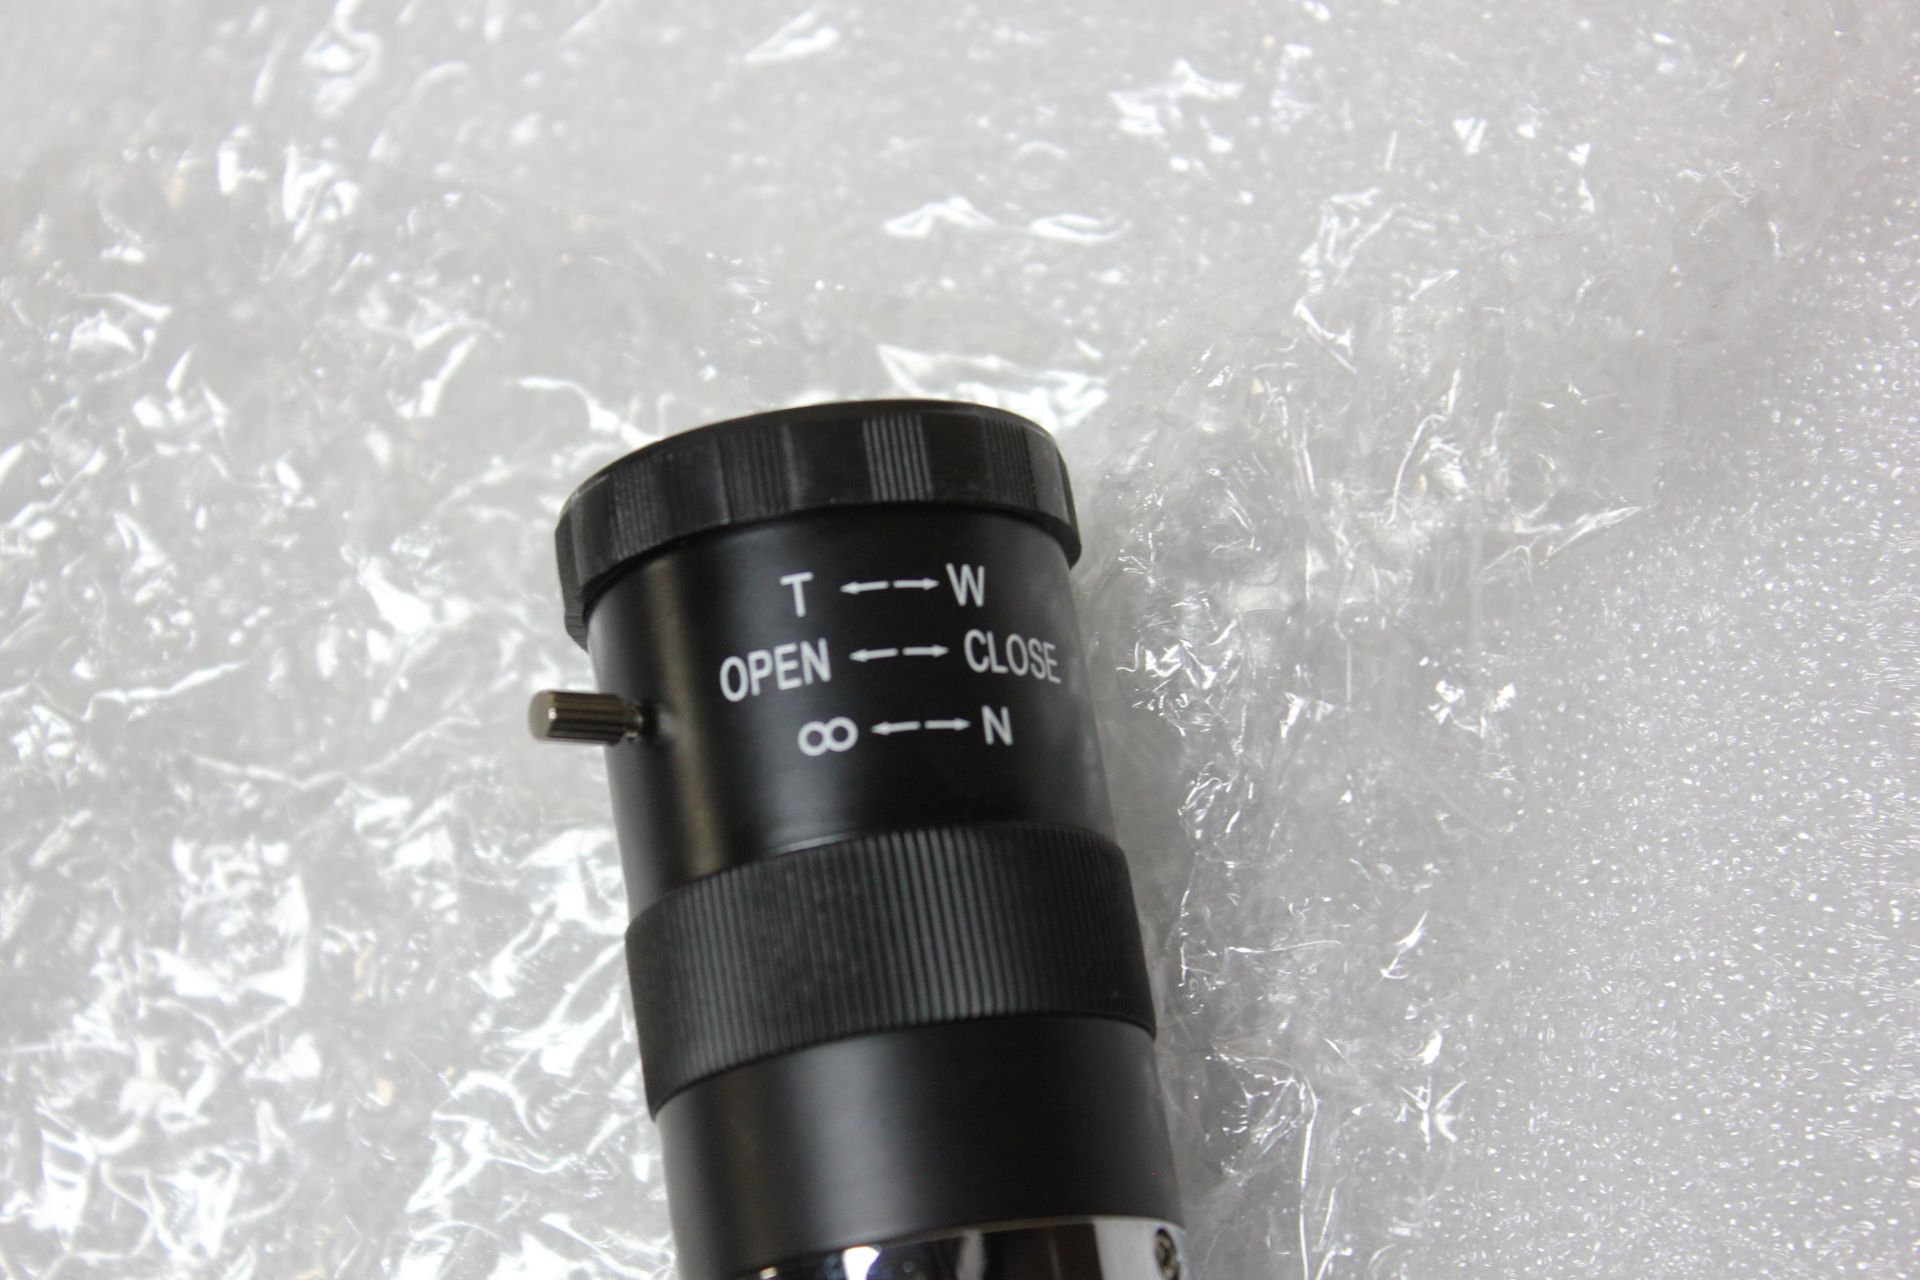 LOT OF NEW MACHINE VISION CAMERA LENSES - Image 4 of 6